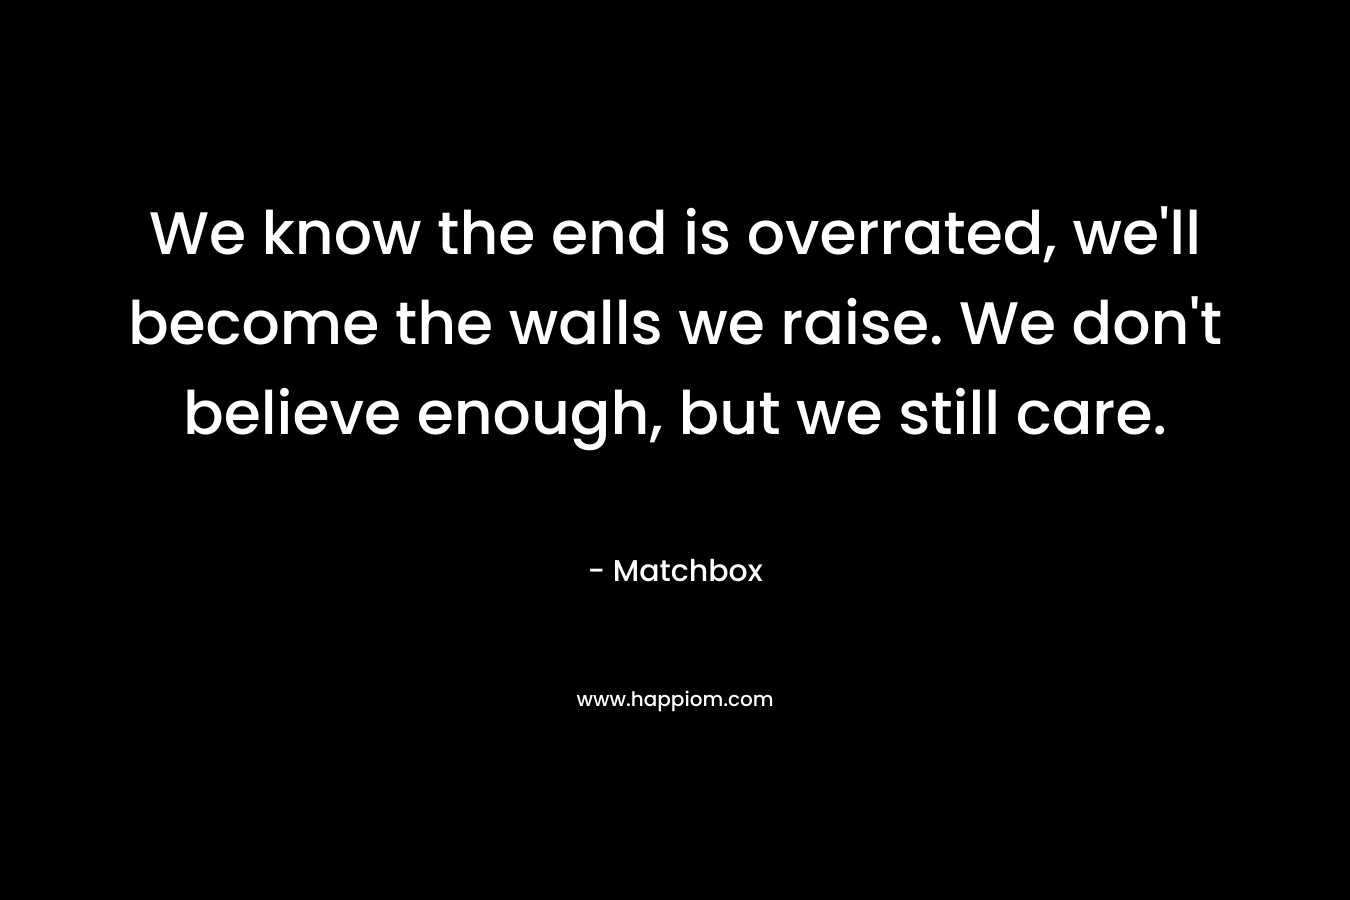 We know the end is overrated, we'll become the walls we raise. We don't believe enough, but we still care.